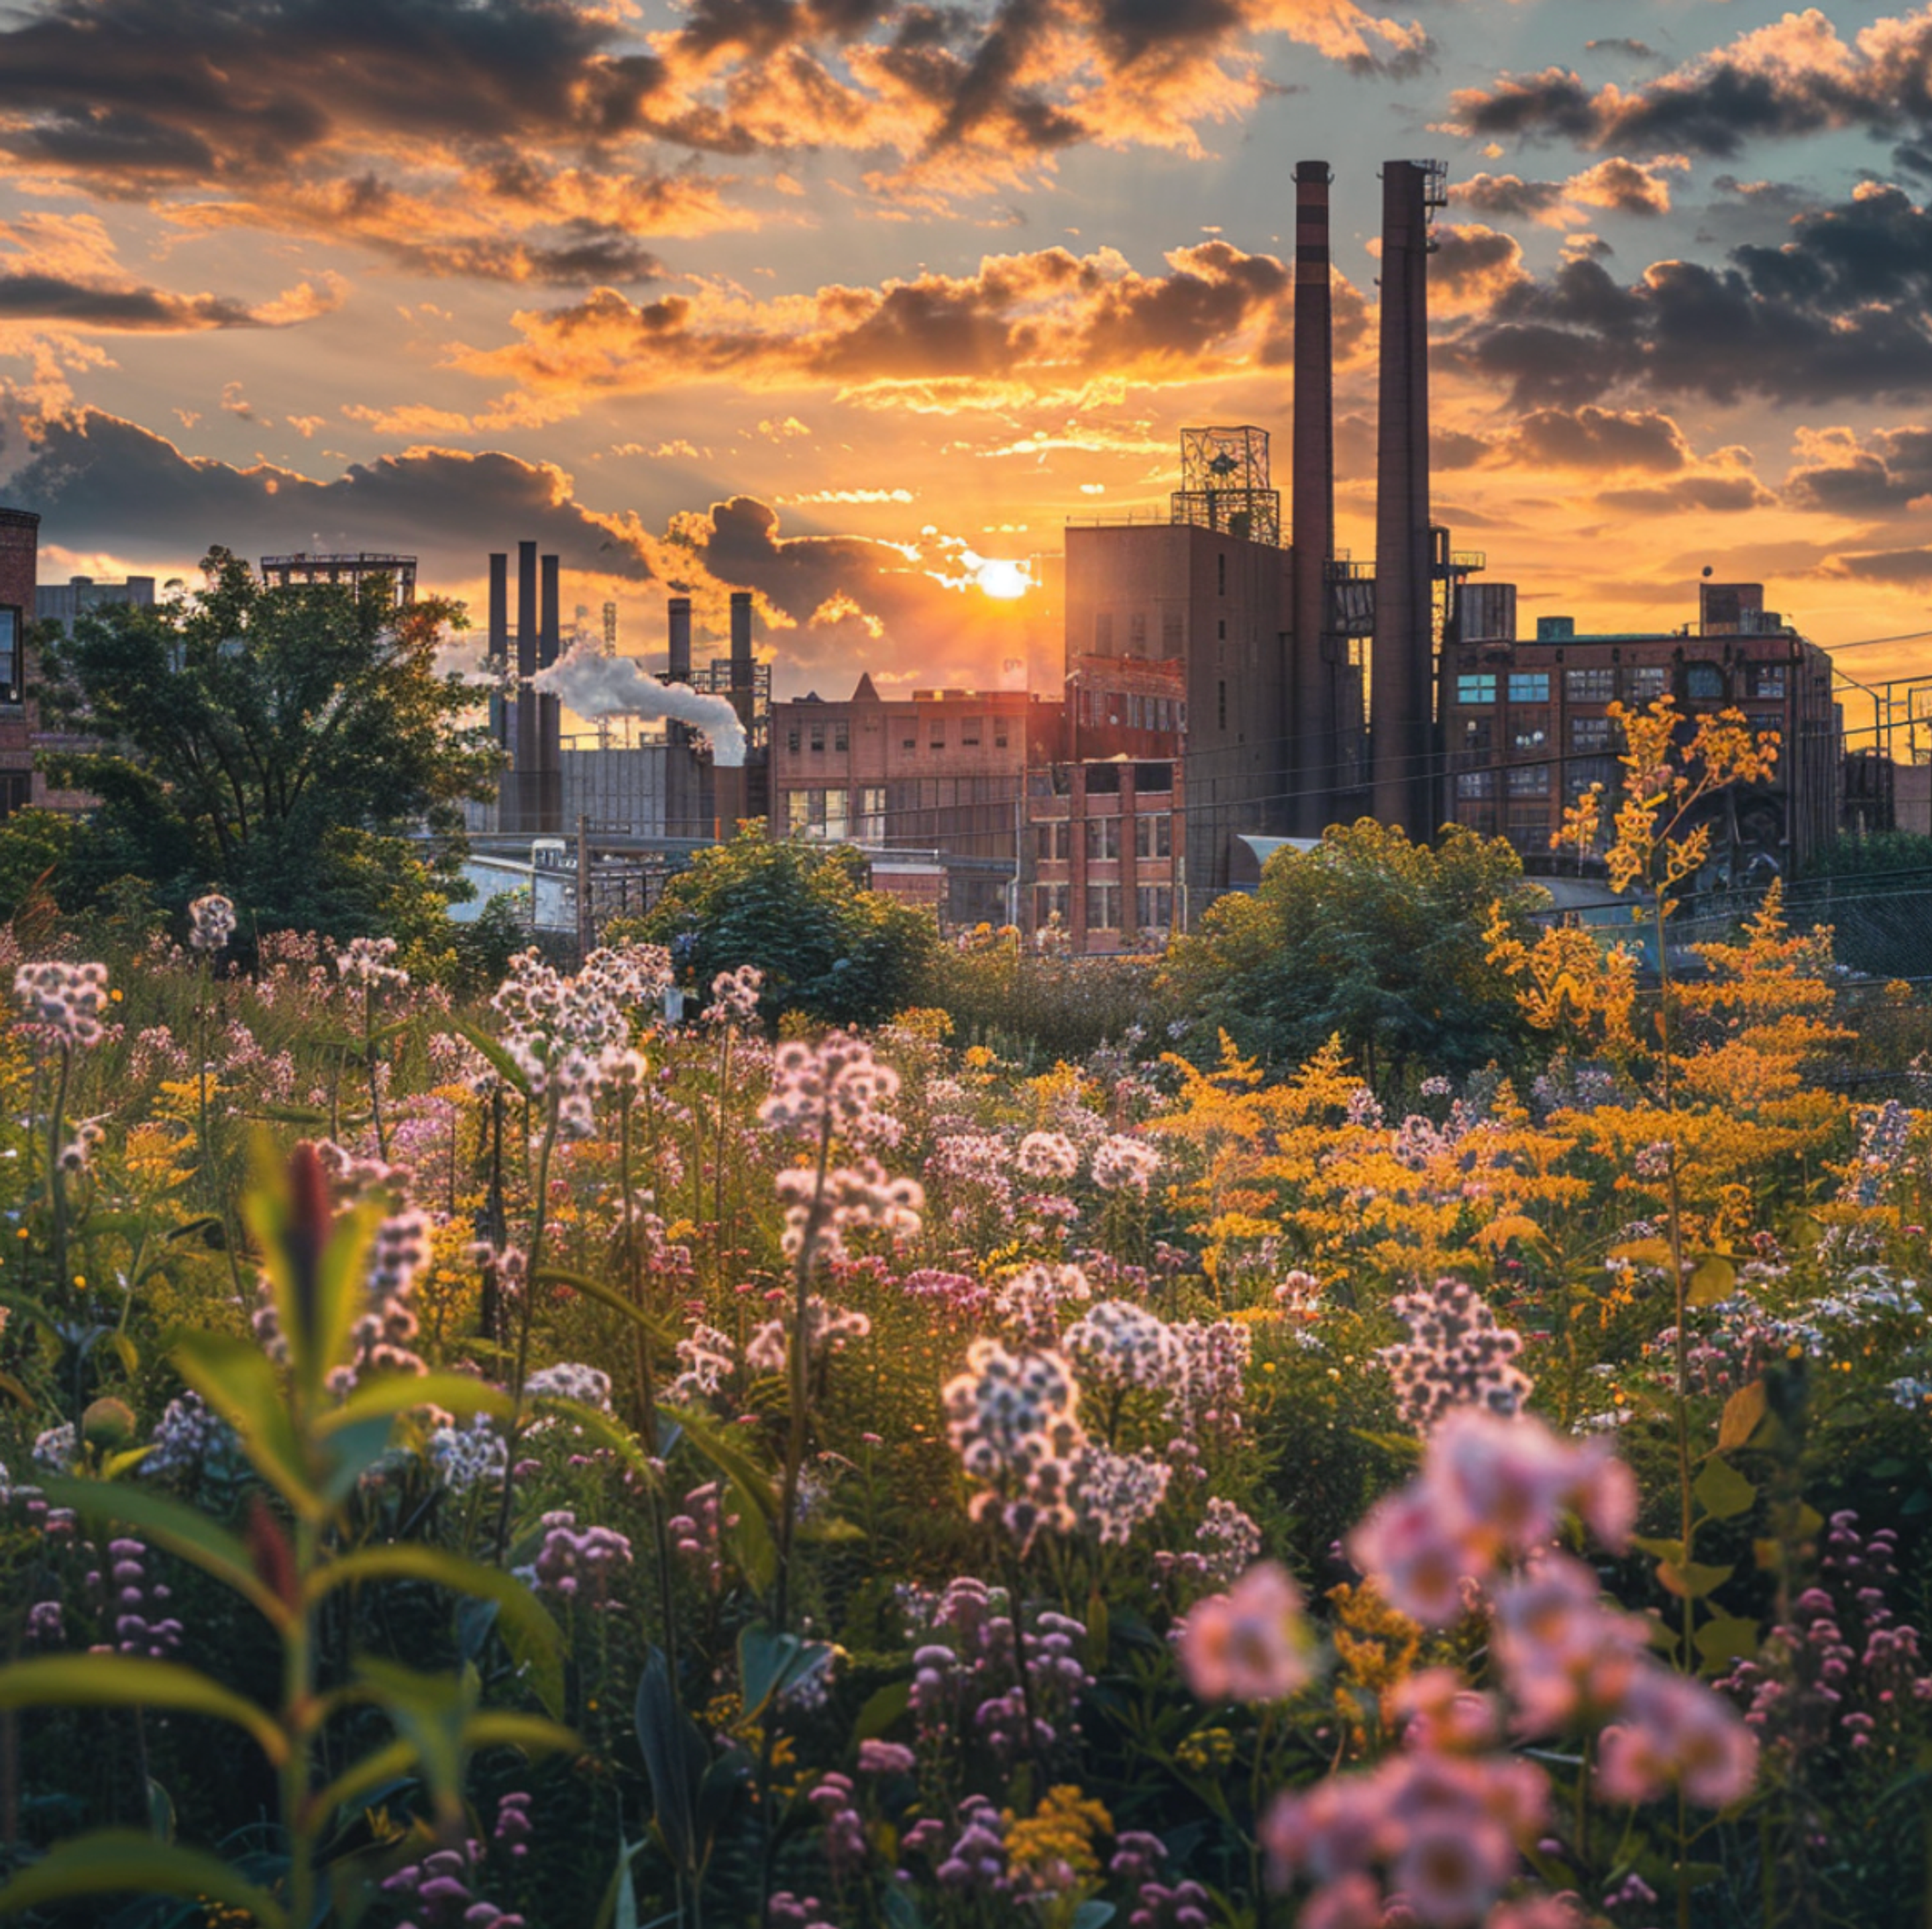 Golden sunset over Youngstown, Ohio, with historic industrial buildings silhouetted against the glowing sky, and wildflowers in the foreground adding a touch of natural beauty, symbolizing the harmony between urban landscapes and flower delivery services in Youngstown.